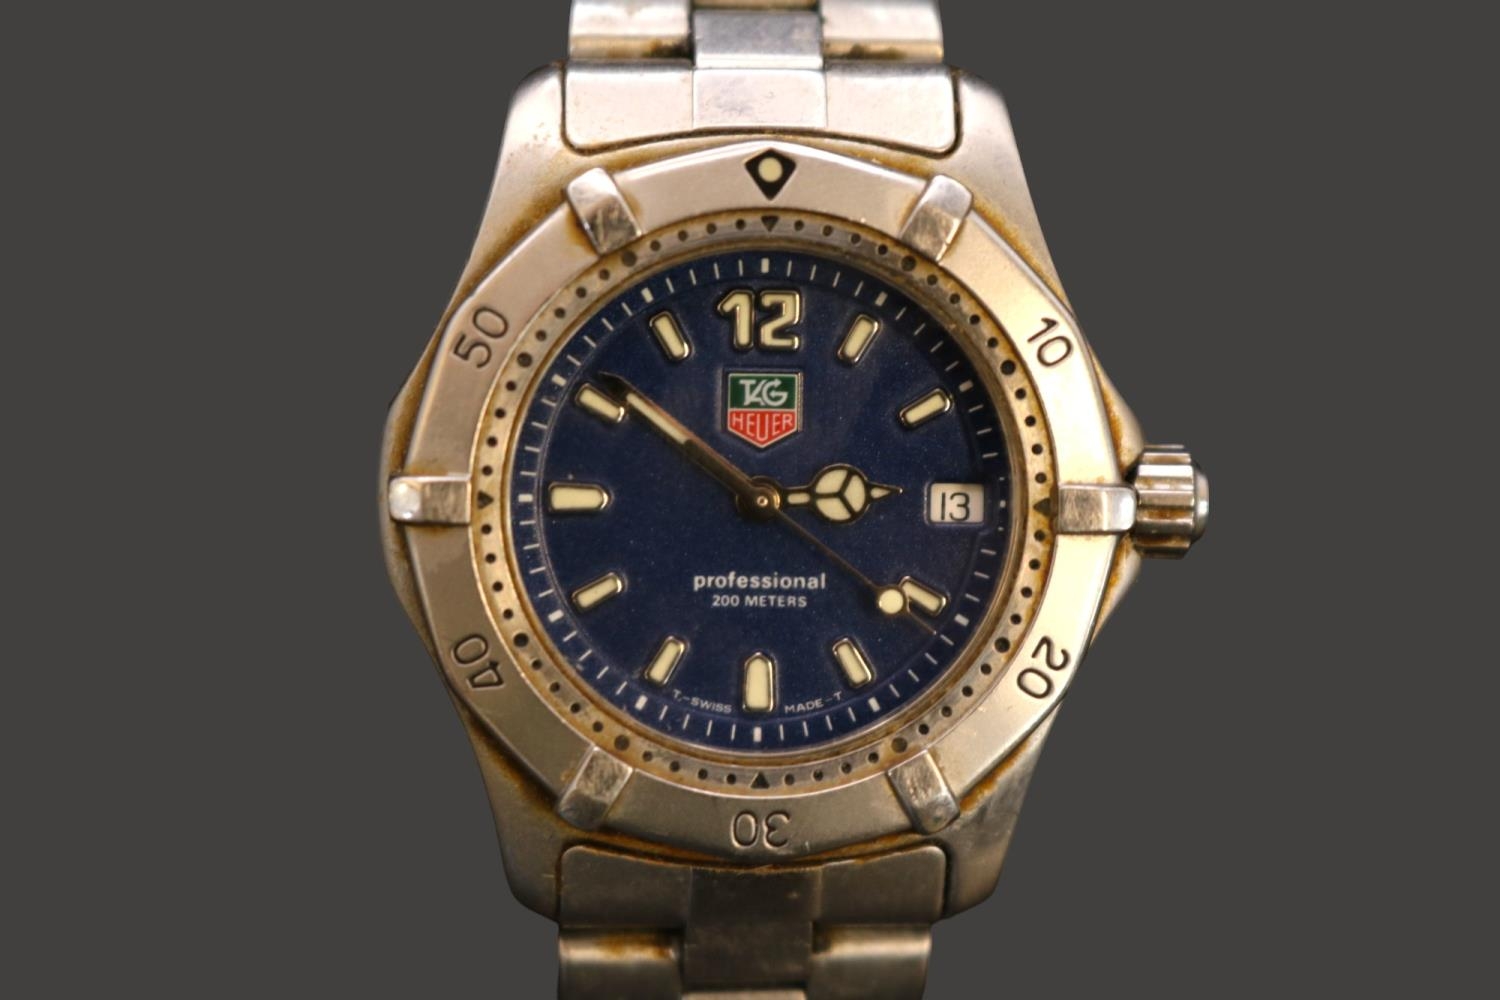 Tag Heuer Professional 200m Swiss quartz watch with date window & blue dial. 36mm case size. - Image 3 of 6